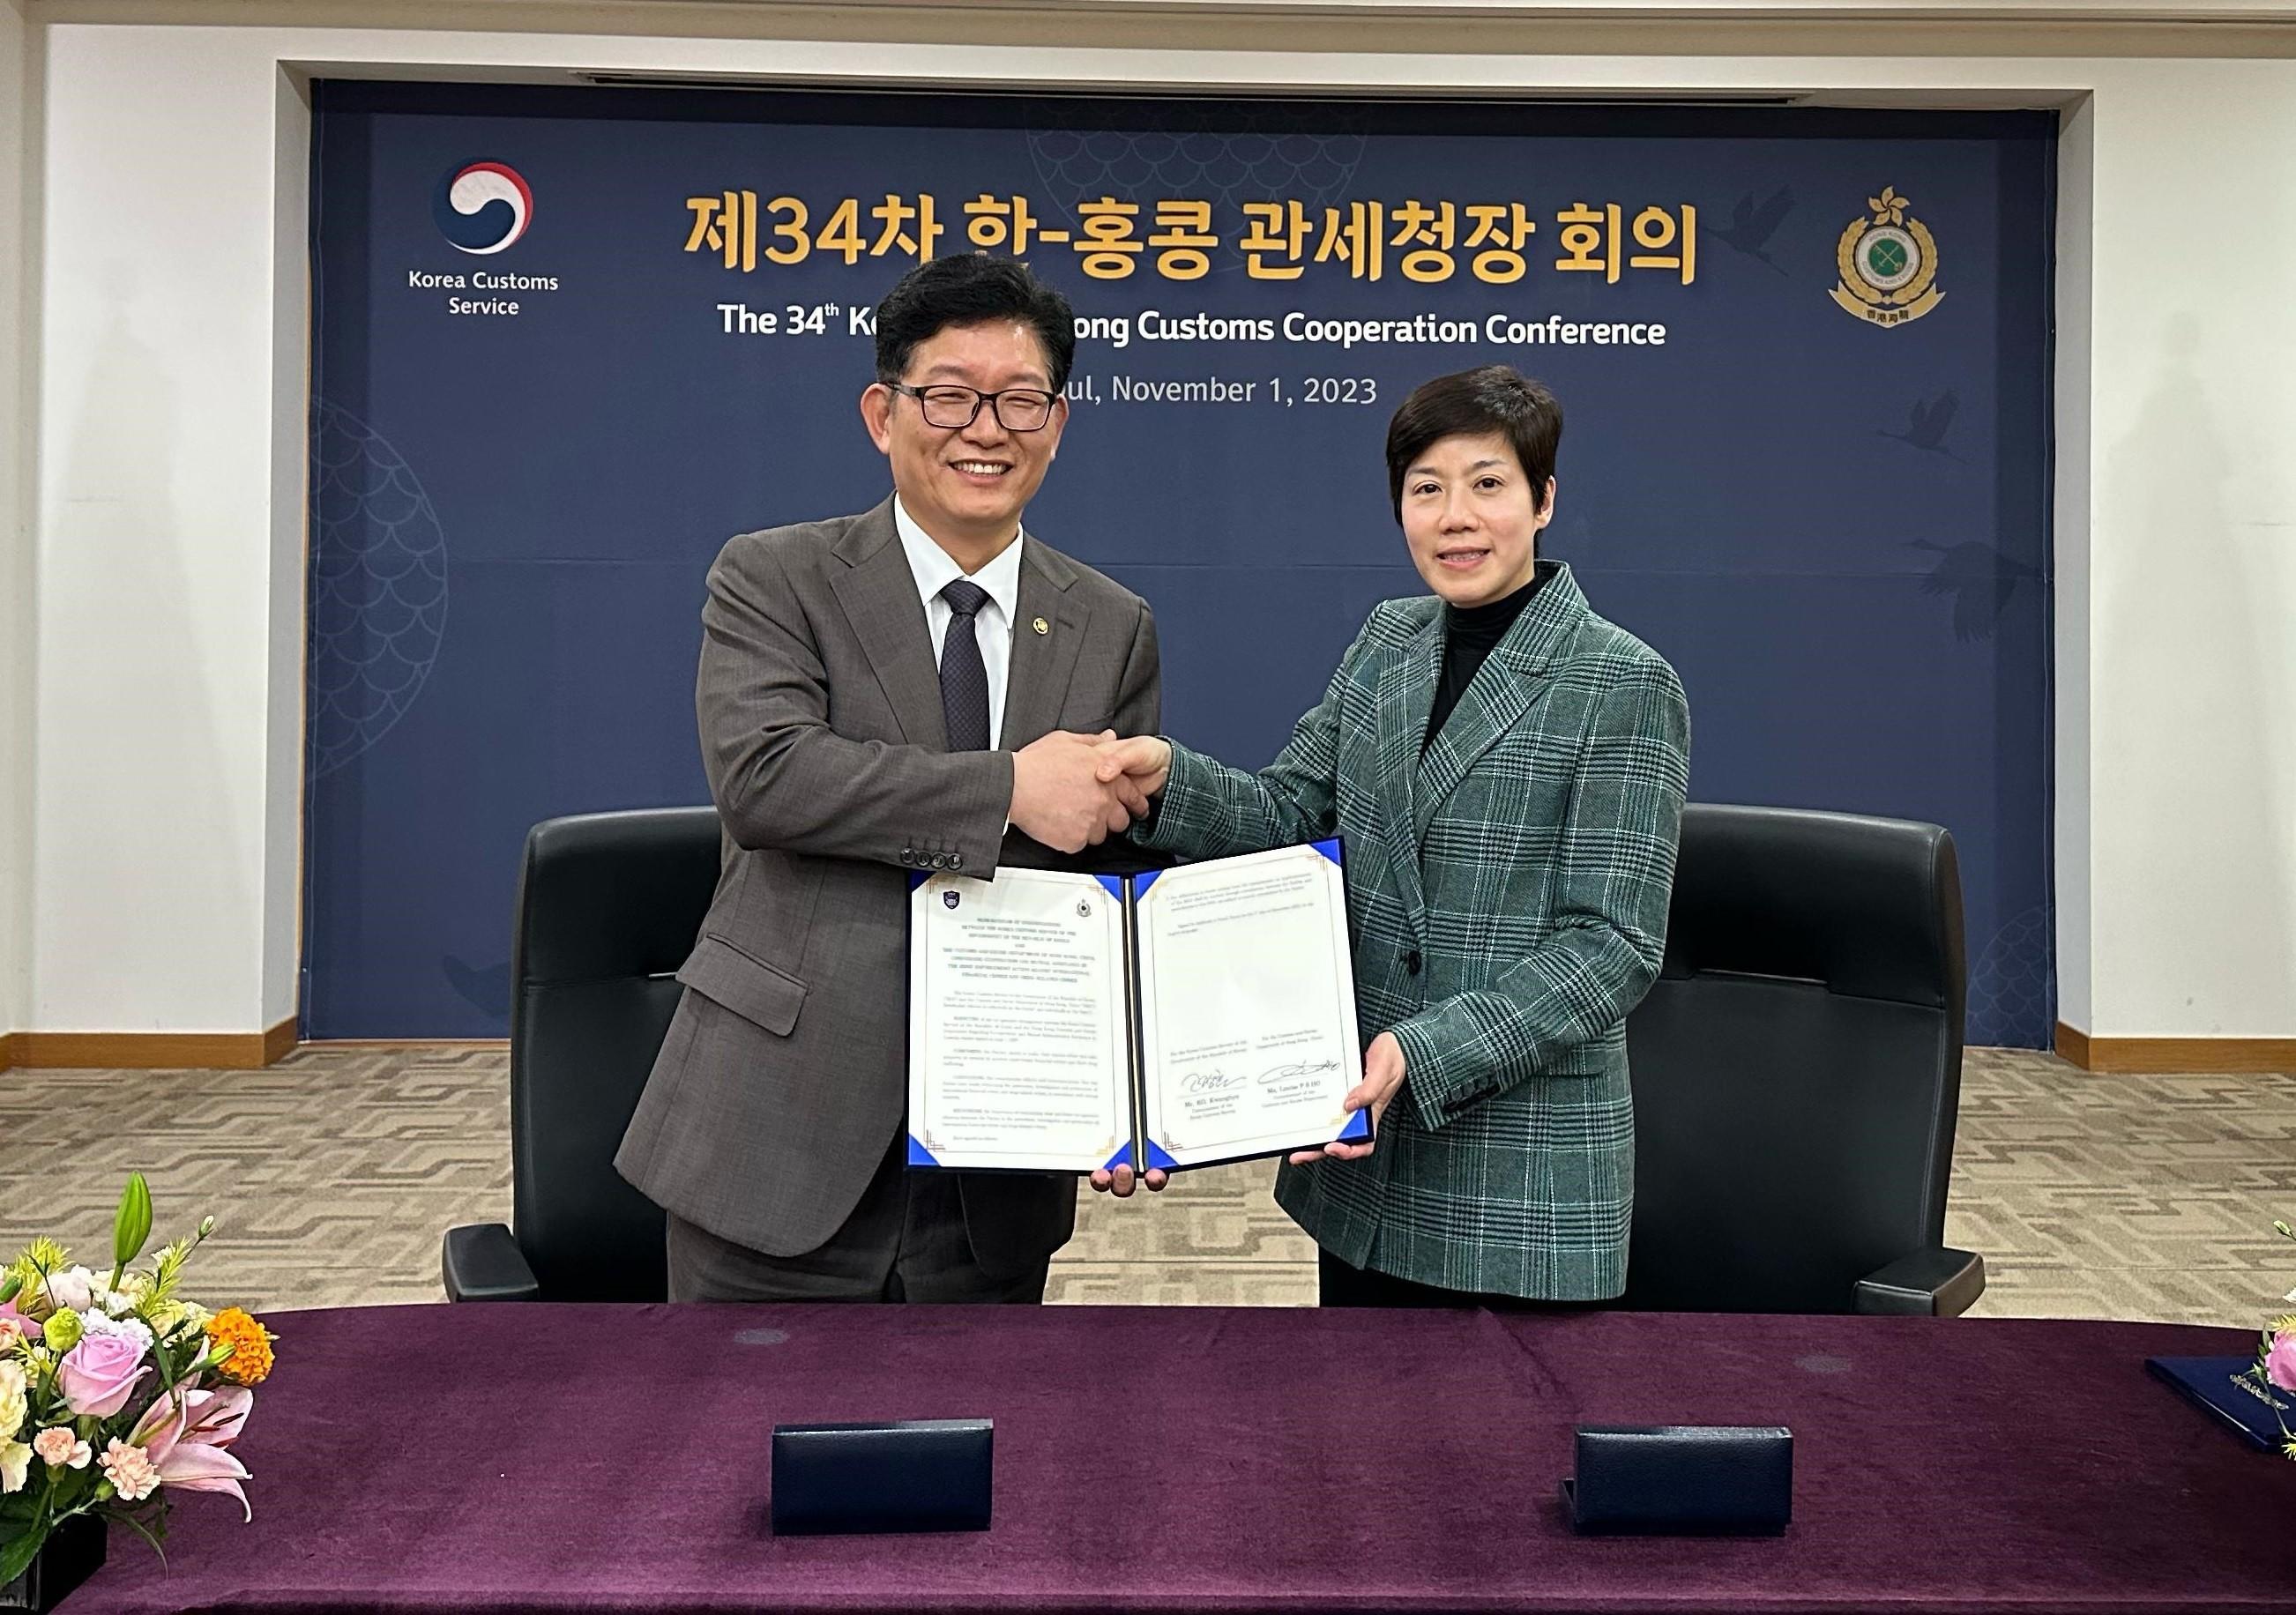 The Commissioner of Customs and Excise, Ms Louise Ho (right), and the Commissioner of Korea Customs Service (KCS), Mr Ko Kwang hyo (left), exchanged a Memorandum of Understanding of co-operation and assistance at the 34th Customs Cooperation Conference between the Customs and Excise Department and the KCS in Seoul, Korea, today (November 1).